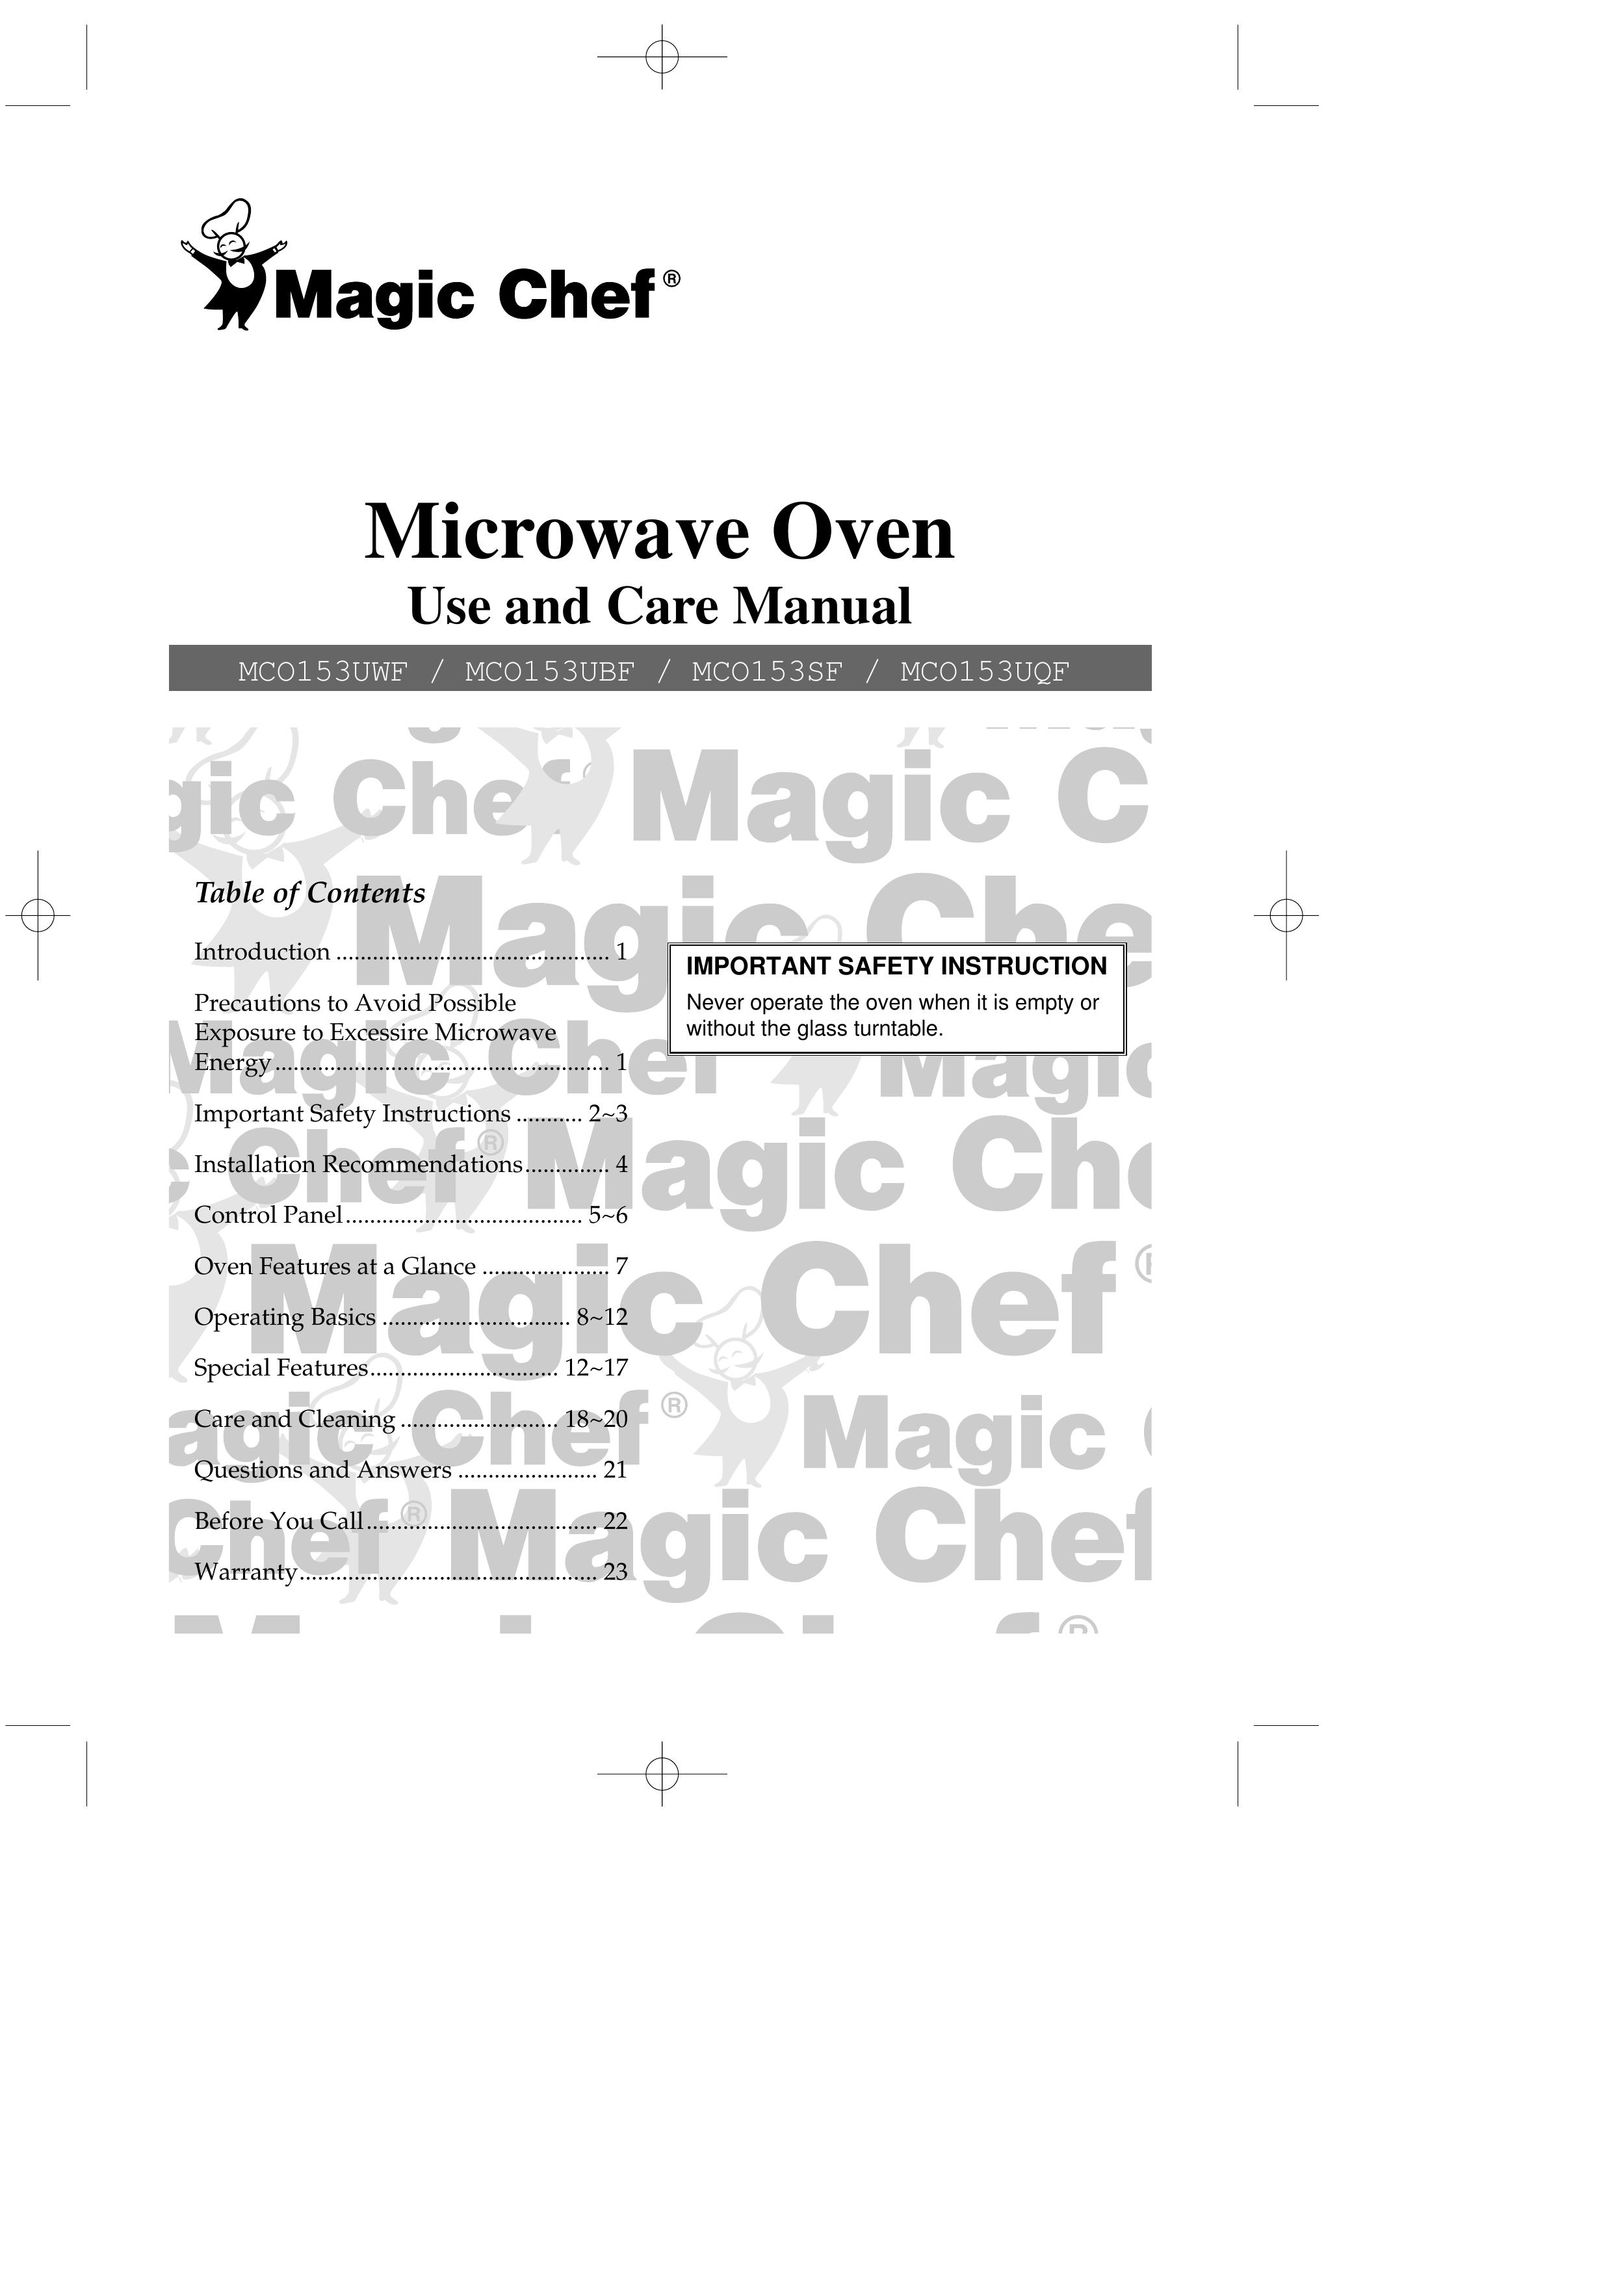 Magic Chef MCO153SF Microwave Oven User Manual